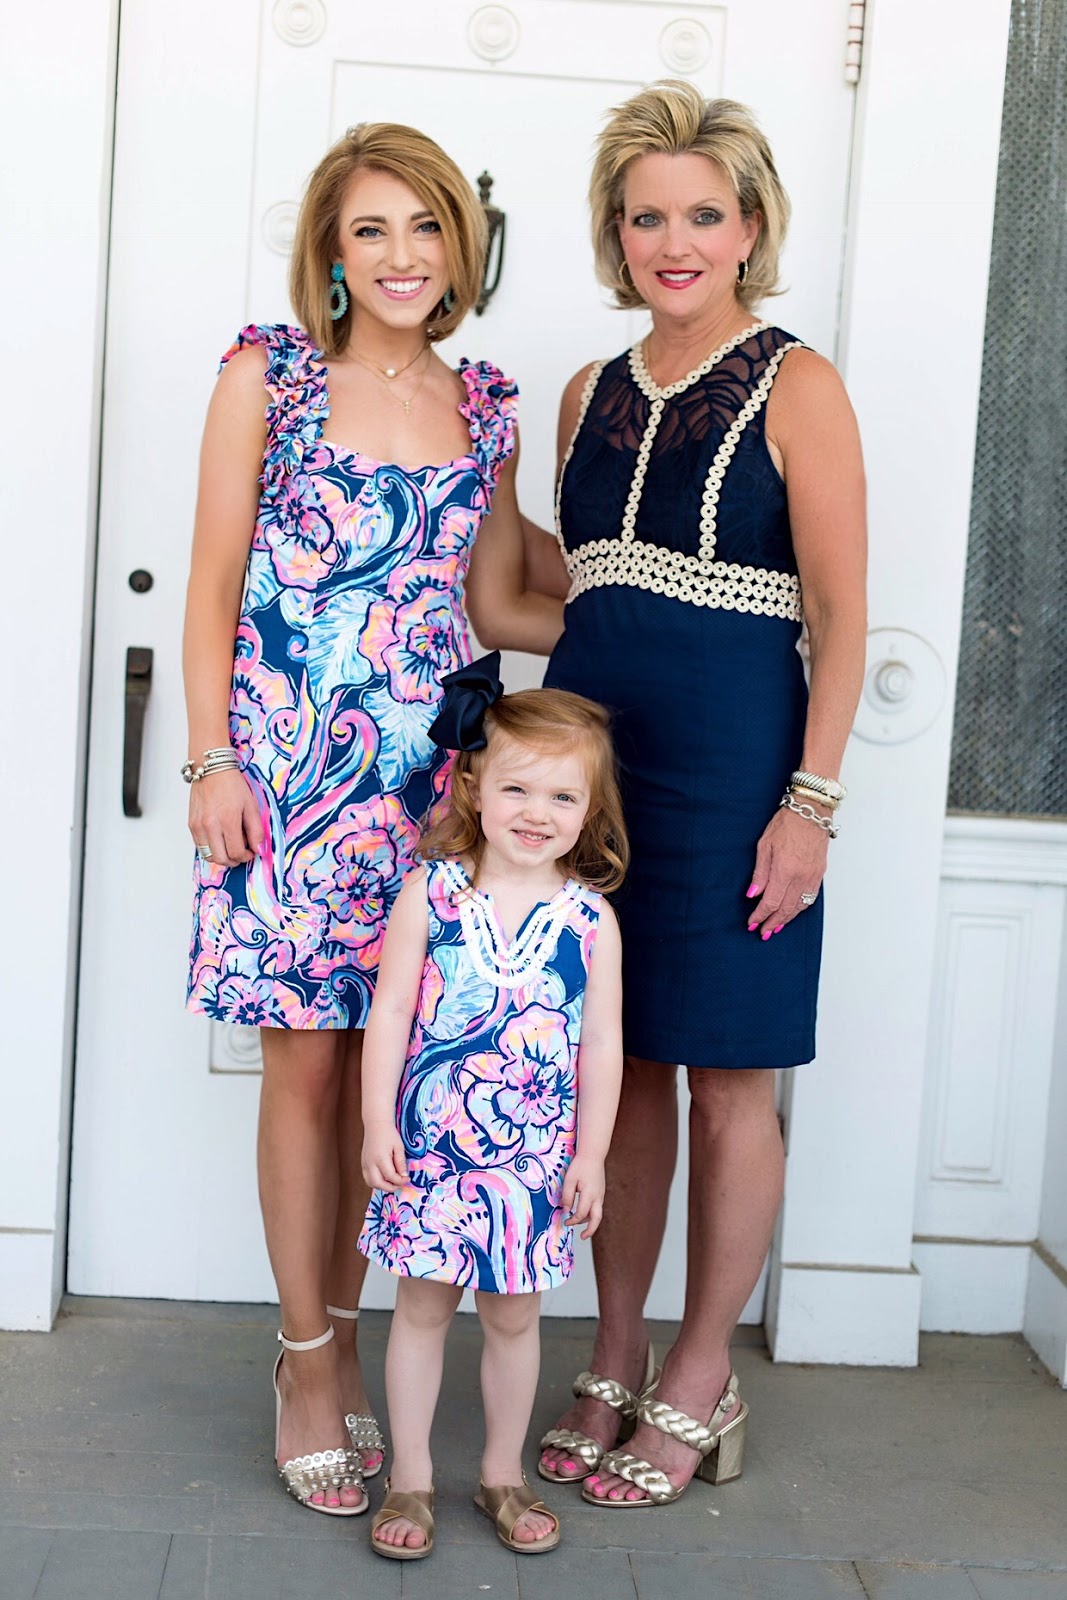 Matching in Lilly Pulitzer - Something Delightful Blog